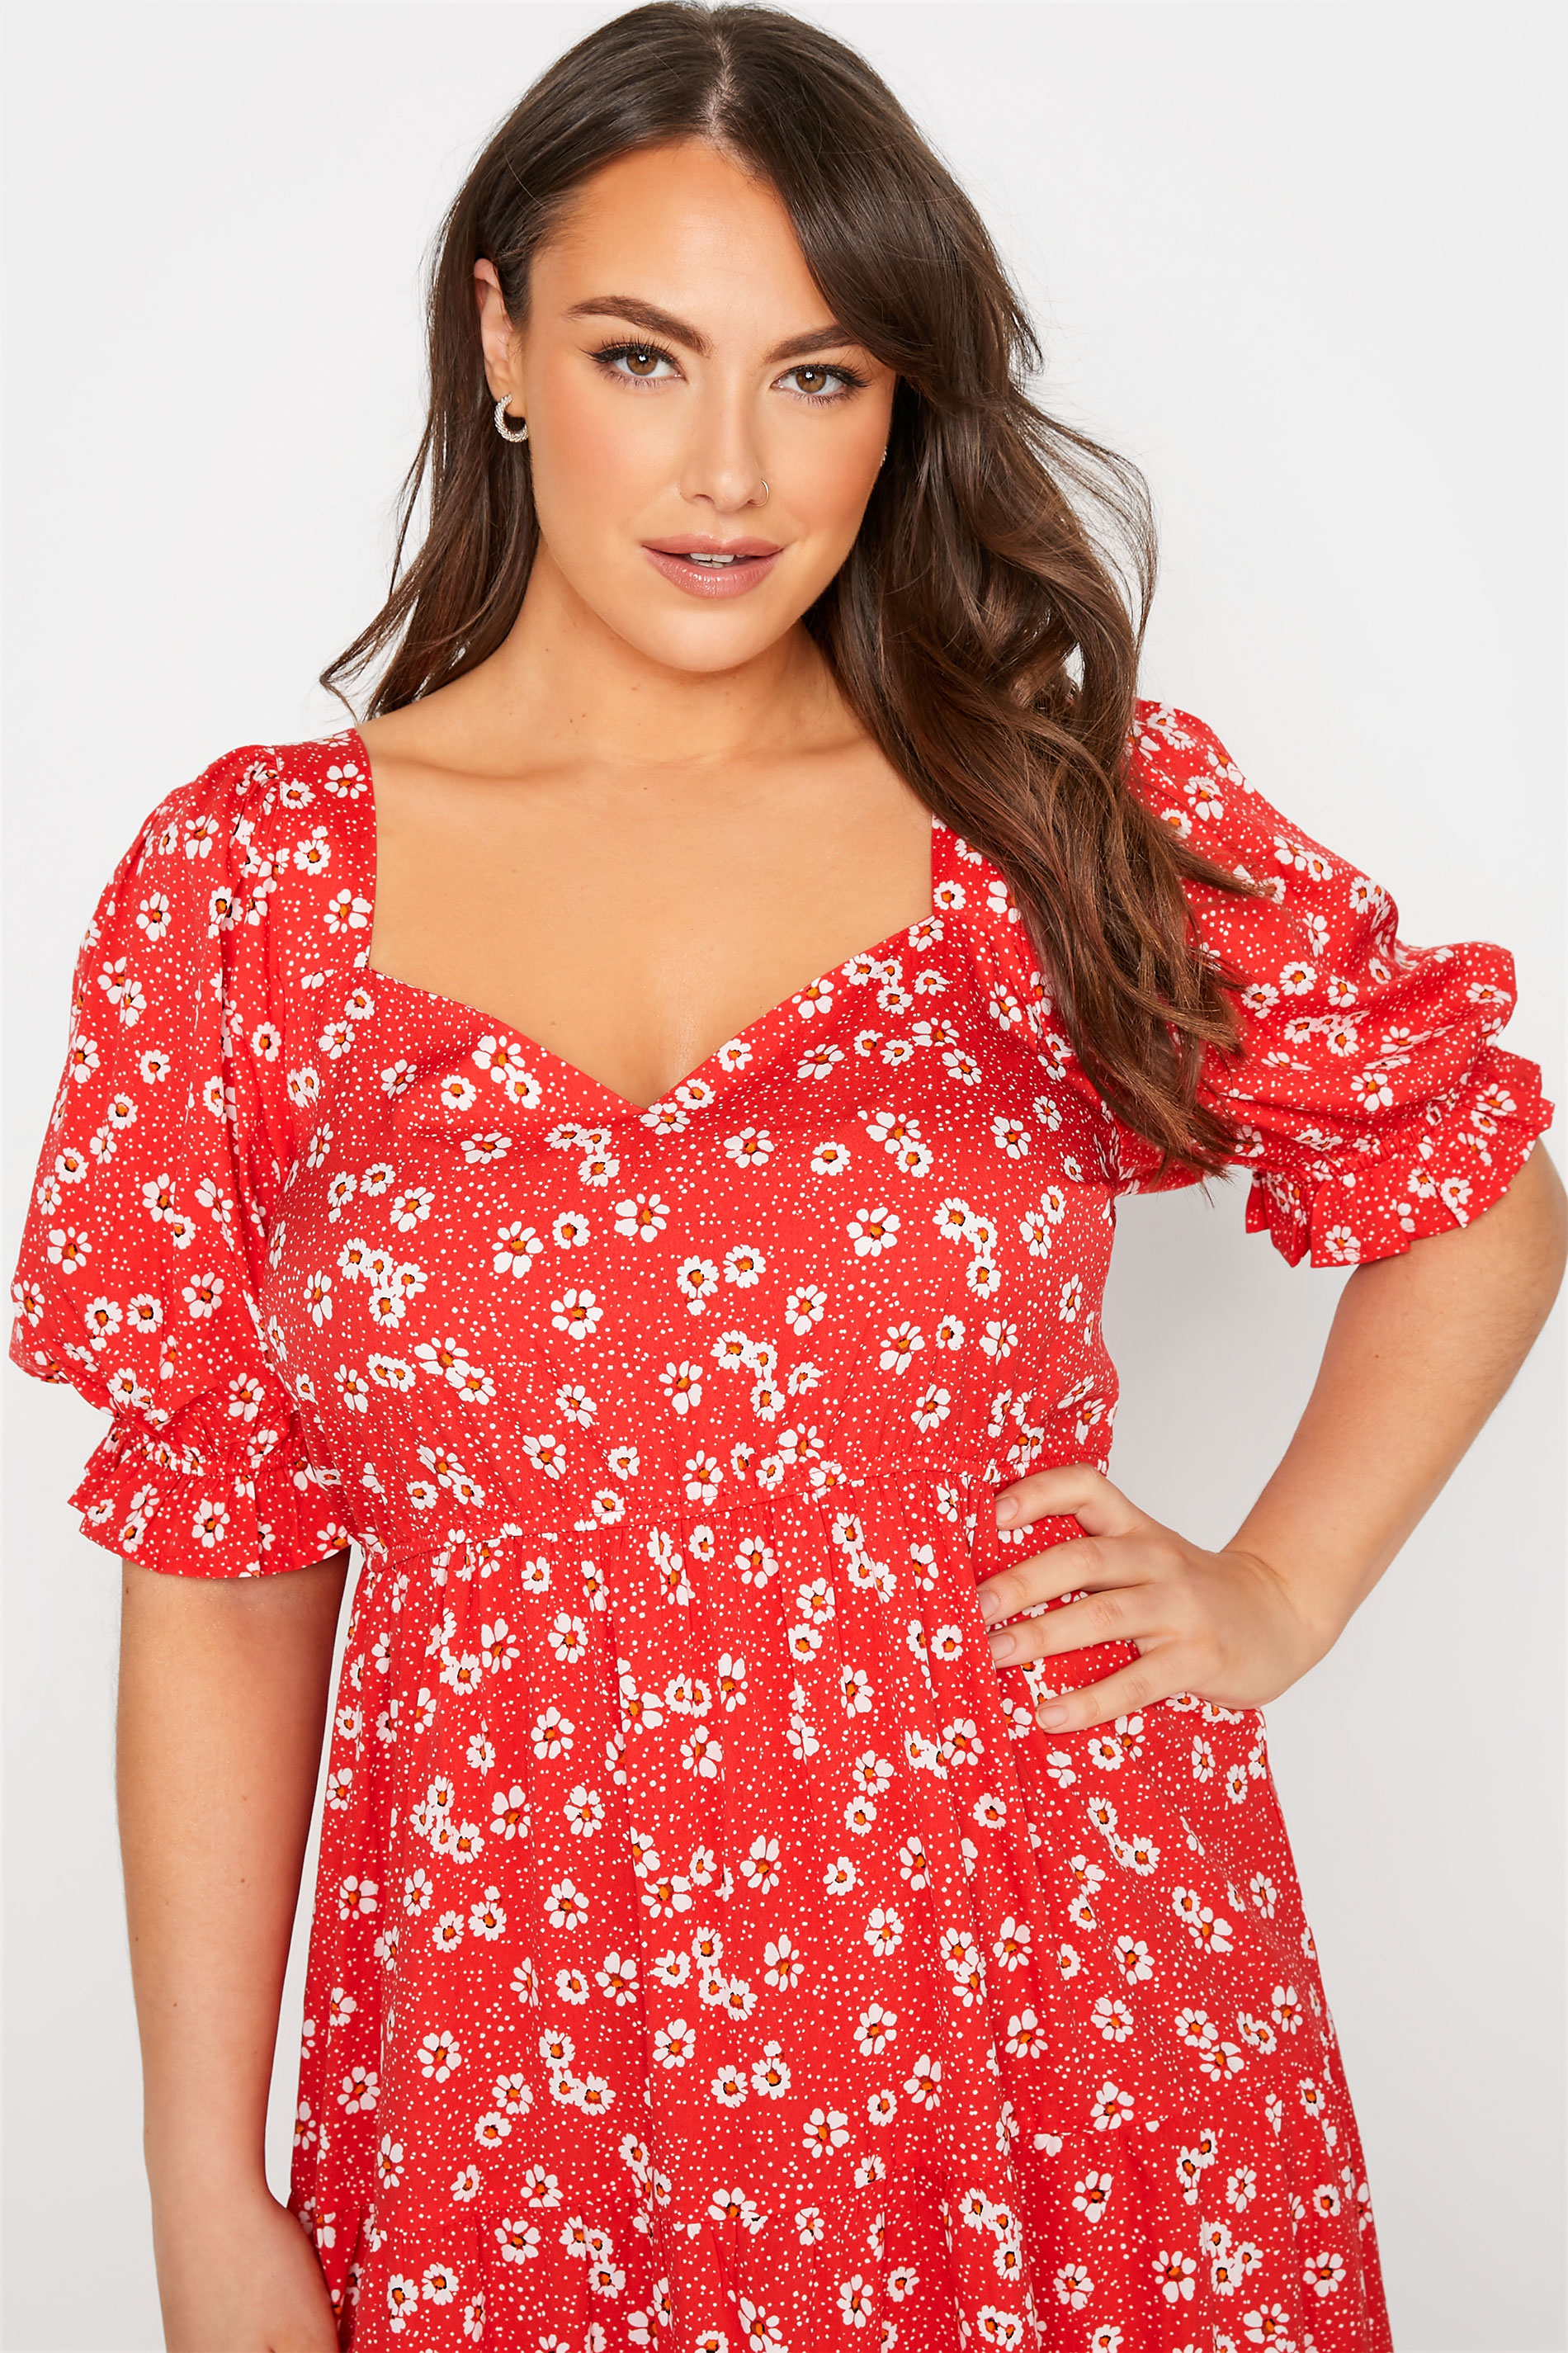 Robes Grande Taille Grande taille  Robes dÉté | LIMITED COLLECTION - Robe Rouge Floral Manches Courtes Bouffantes - UX39424